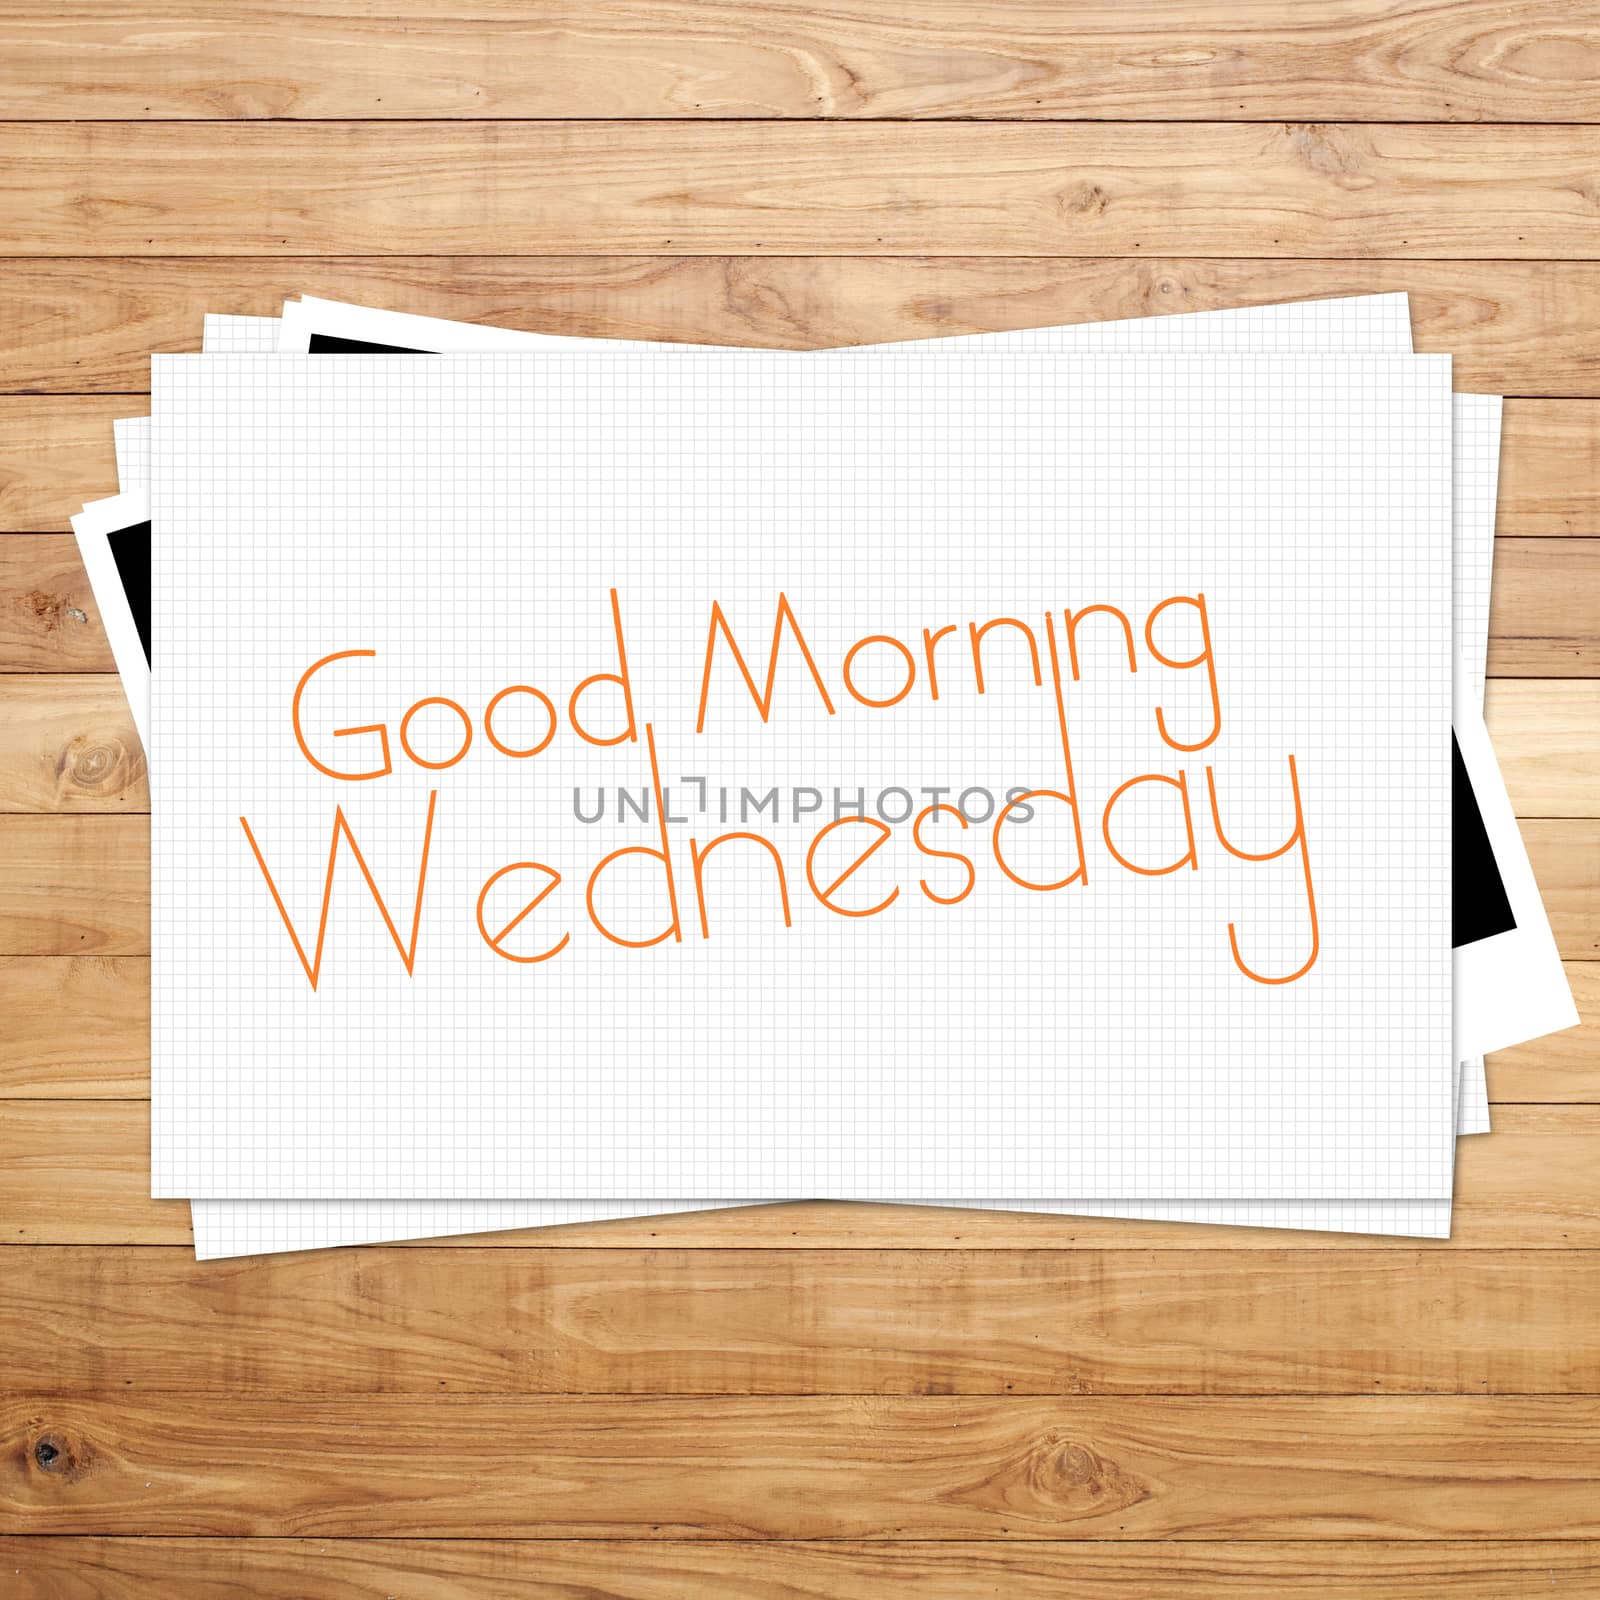 Good Morning Wednesday on paper and Brown wood plank background